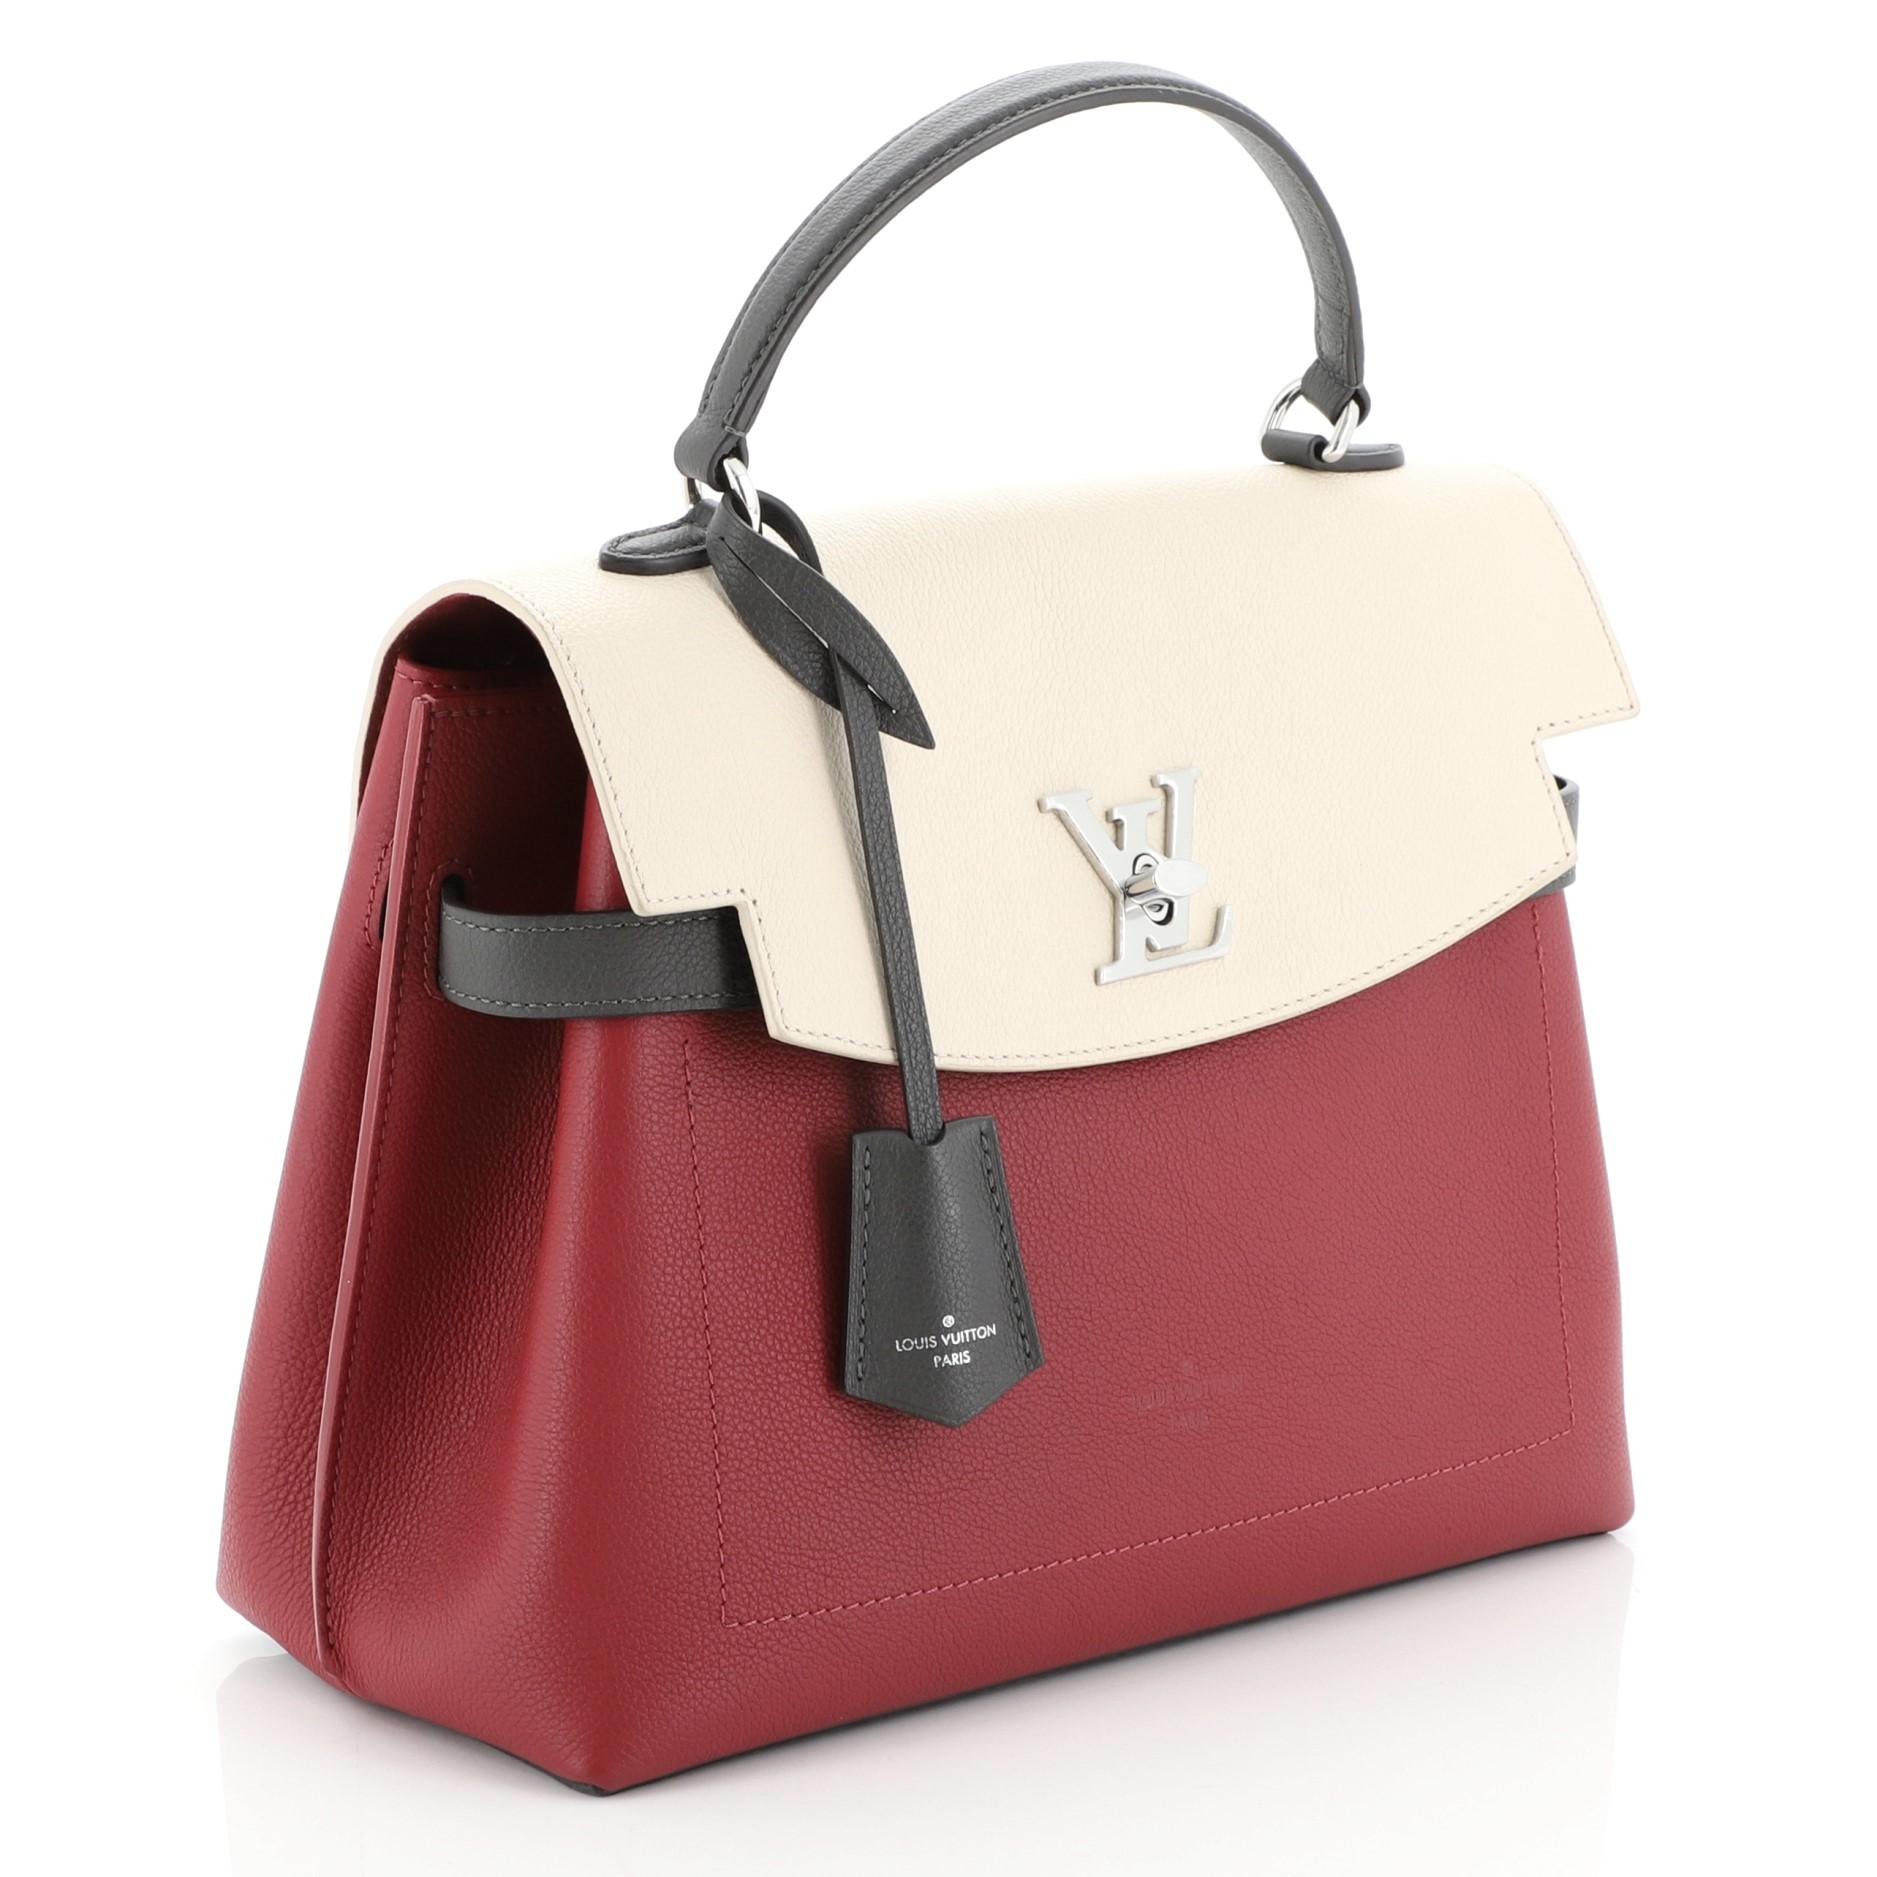 This Louis Vuitton Lockme Ever Handbag Leather MM, crafted in gray, neutral, and red leather, features a single loop leather handle and silver-tone hardware. Its flap with turn-lock closure opens to a red microfiber interior with slip pockets.